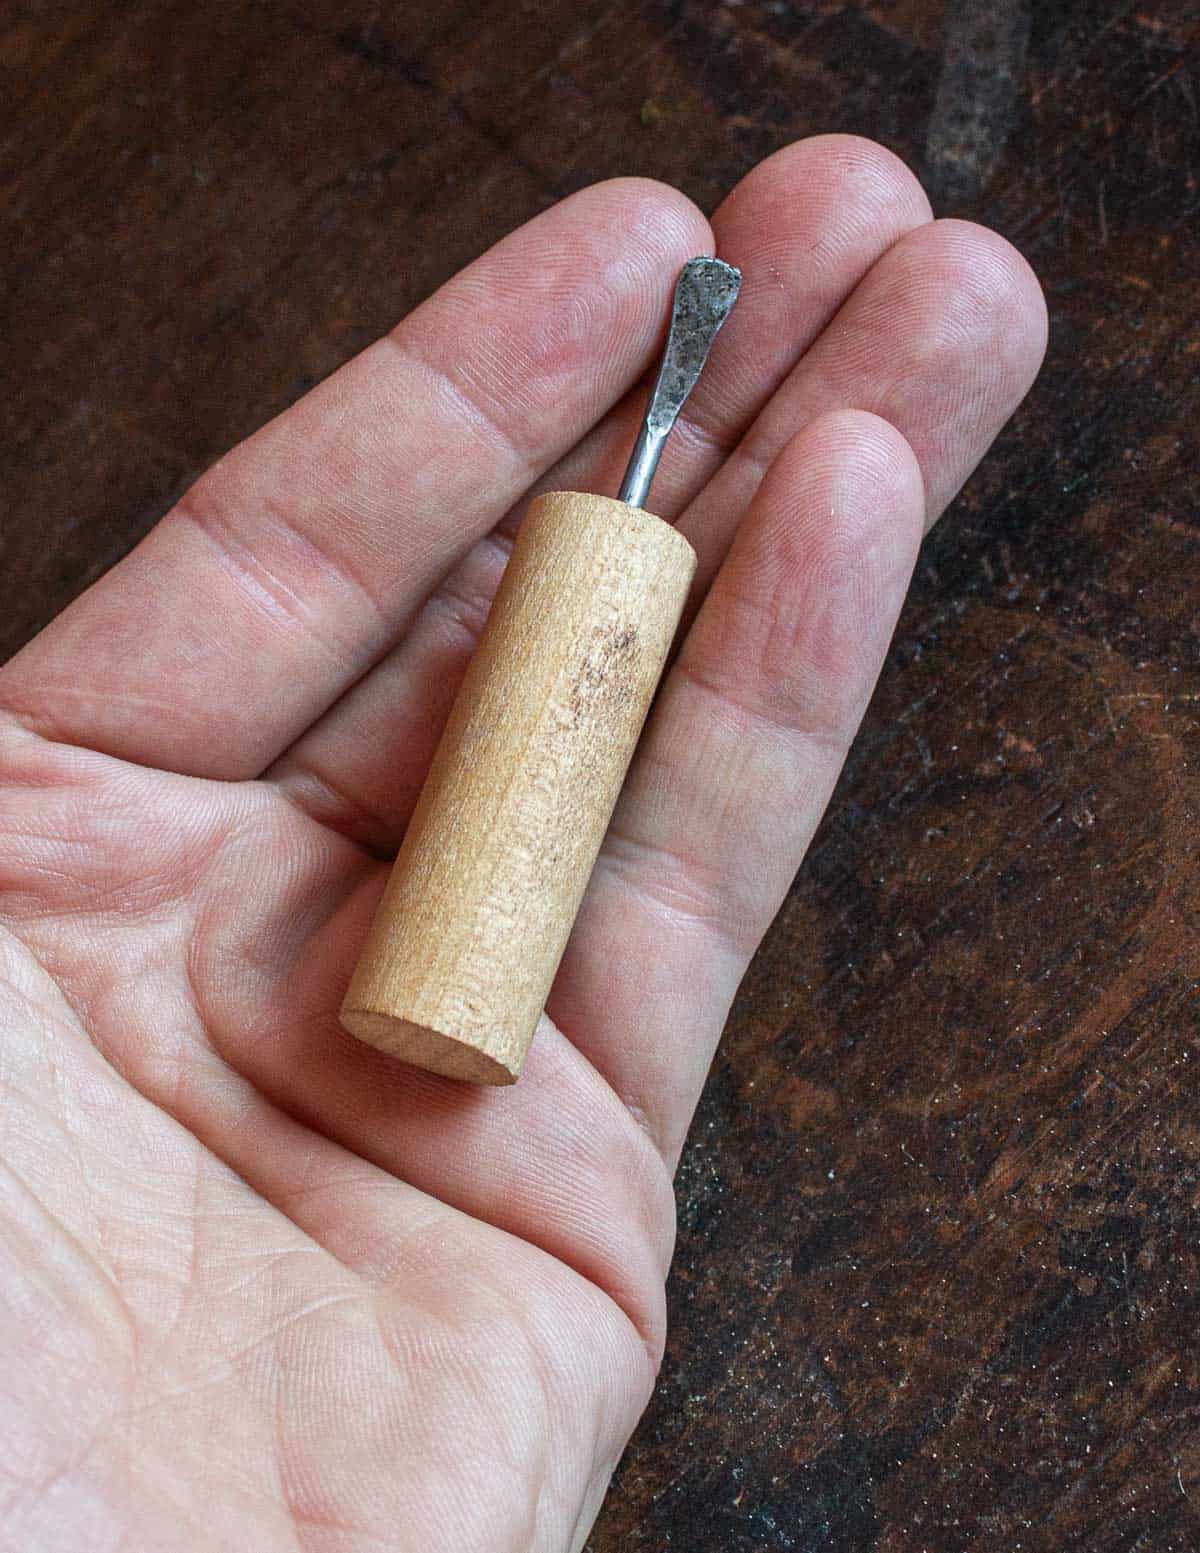 A homemade nut pick for black walnuts 